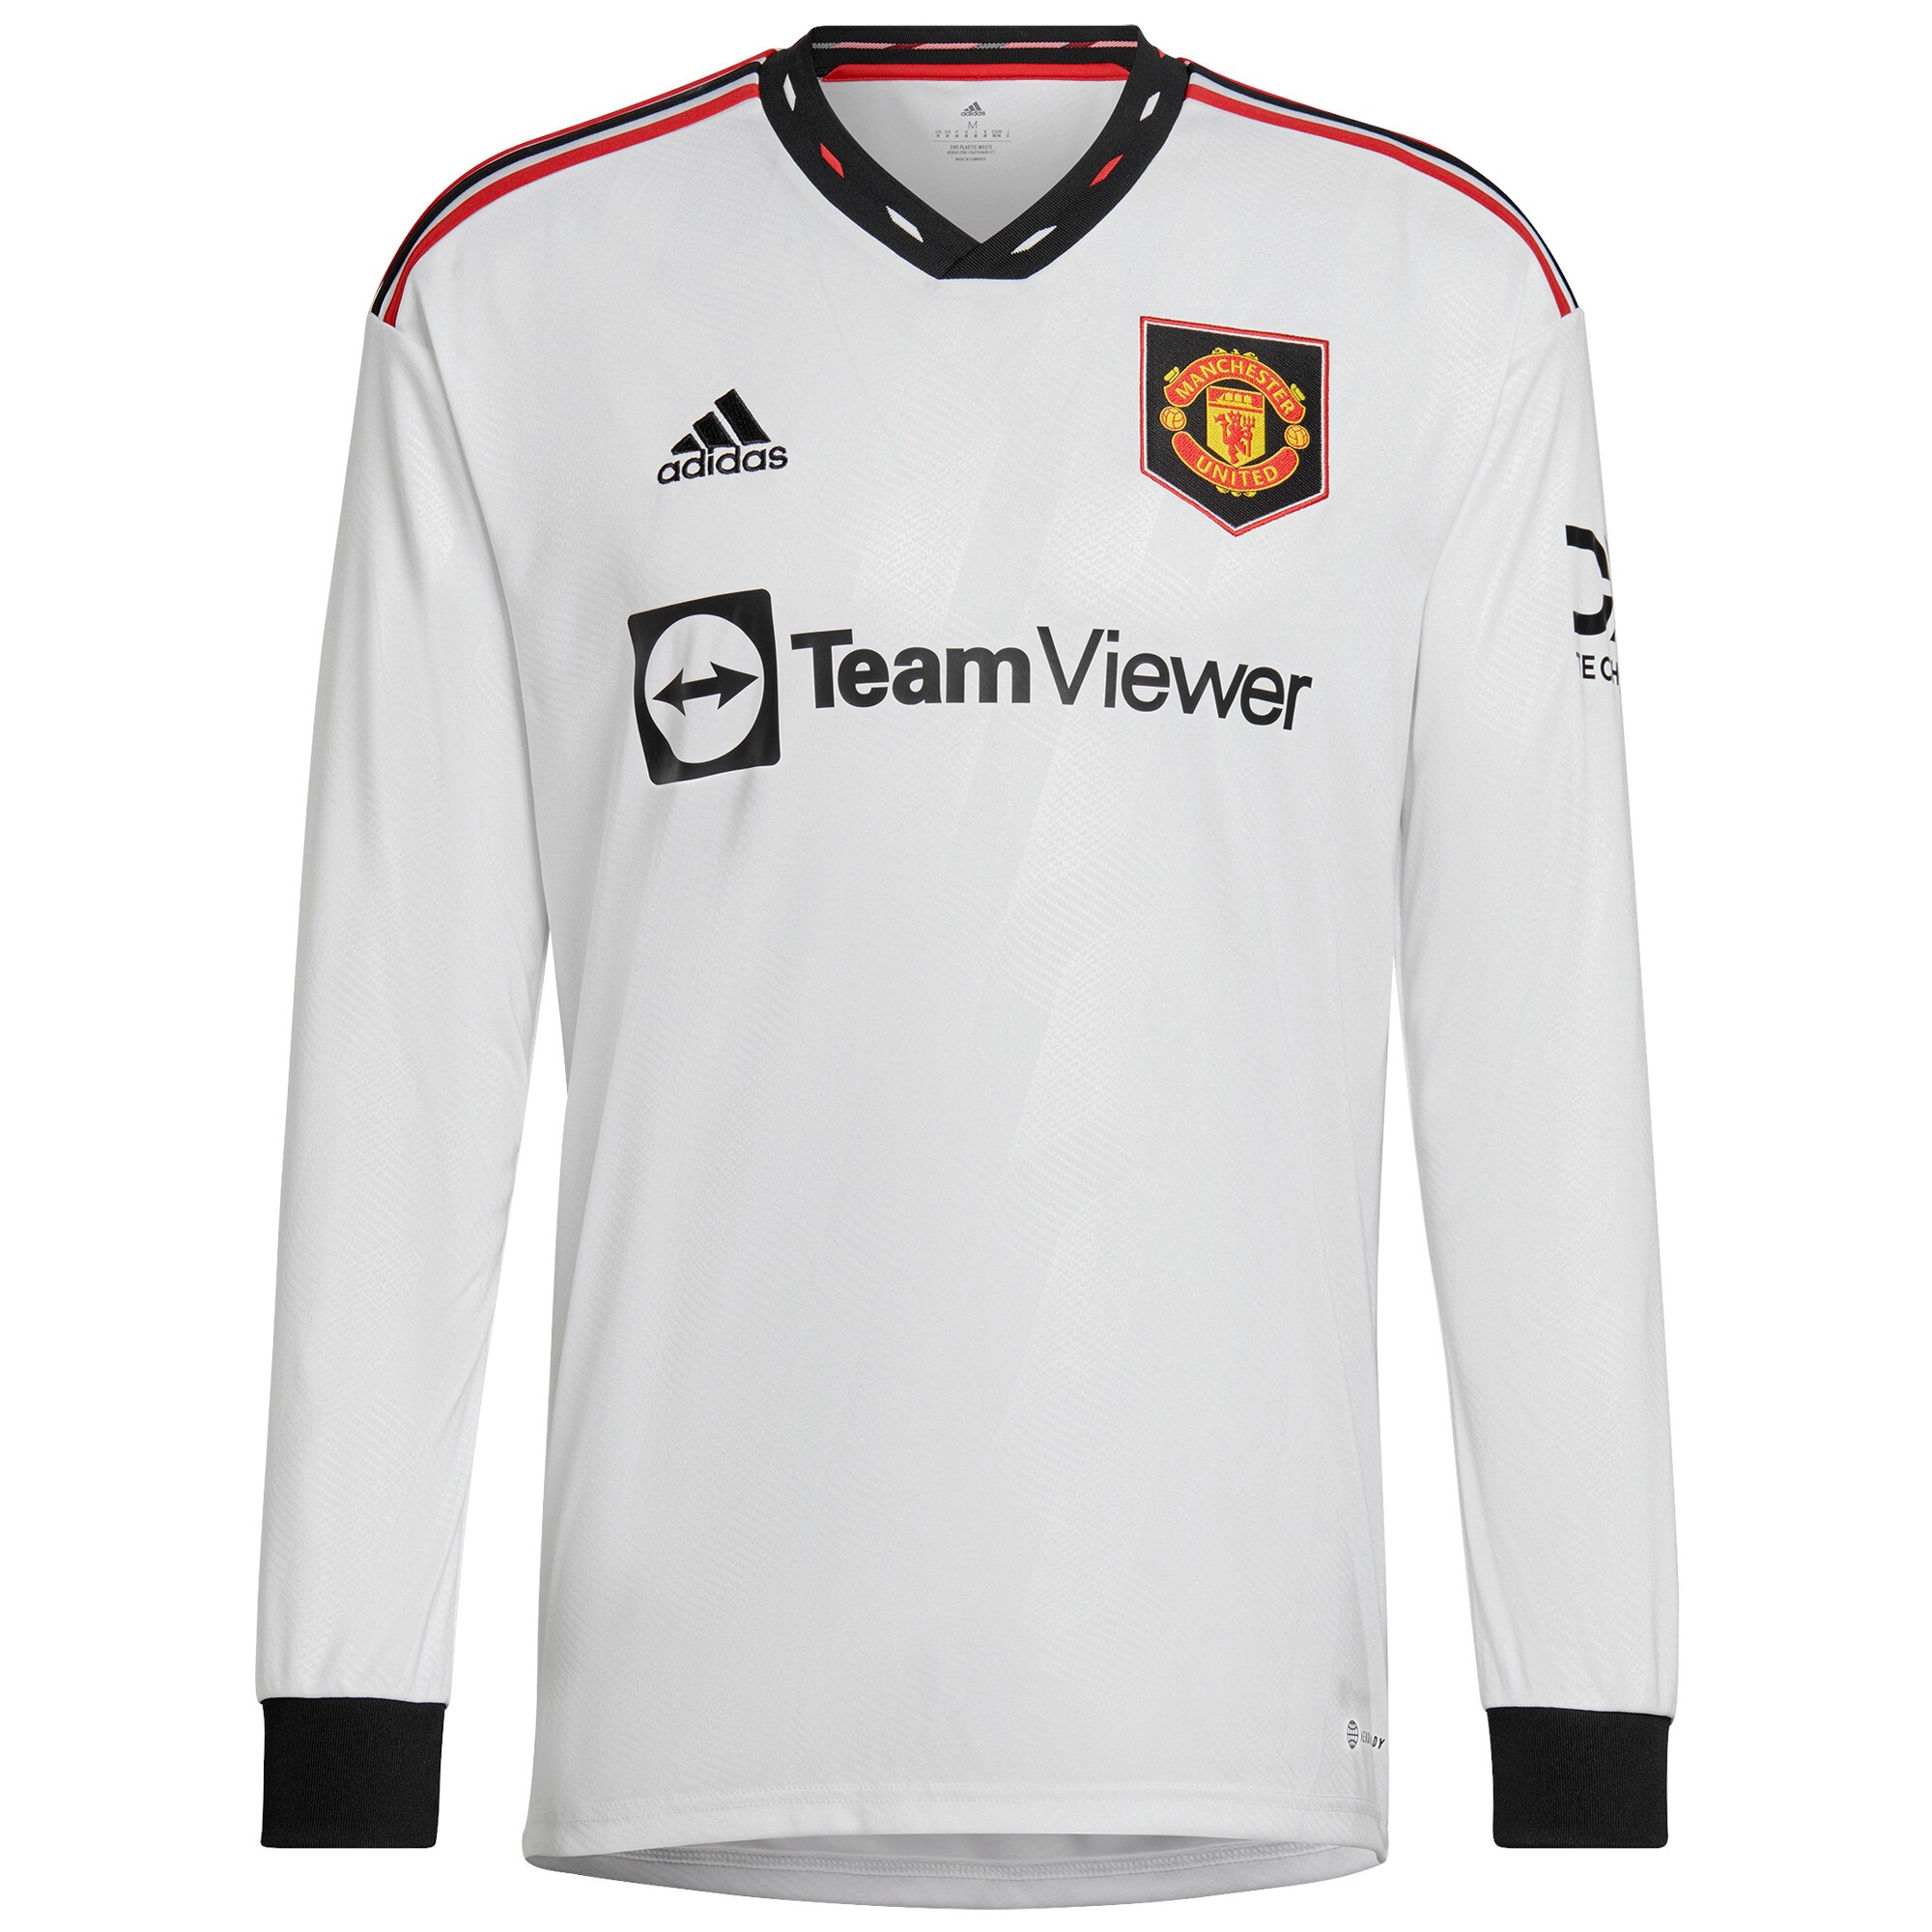 Manchester United Away Shirt 2022-23 - Long Sleeve with Jones 4 printing